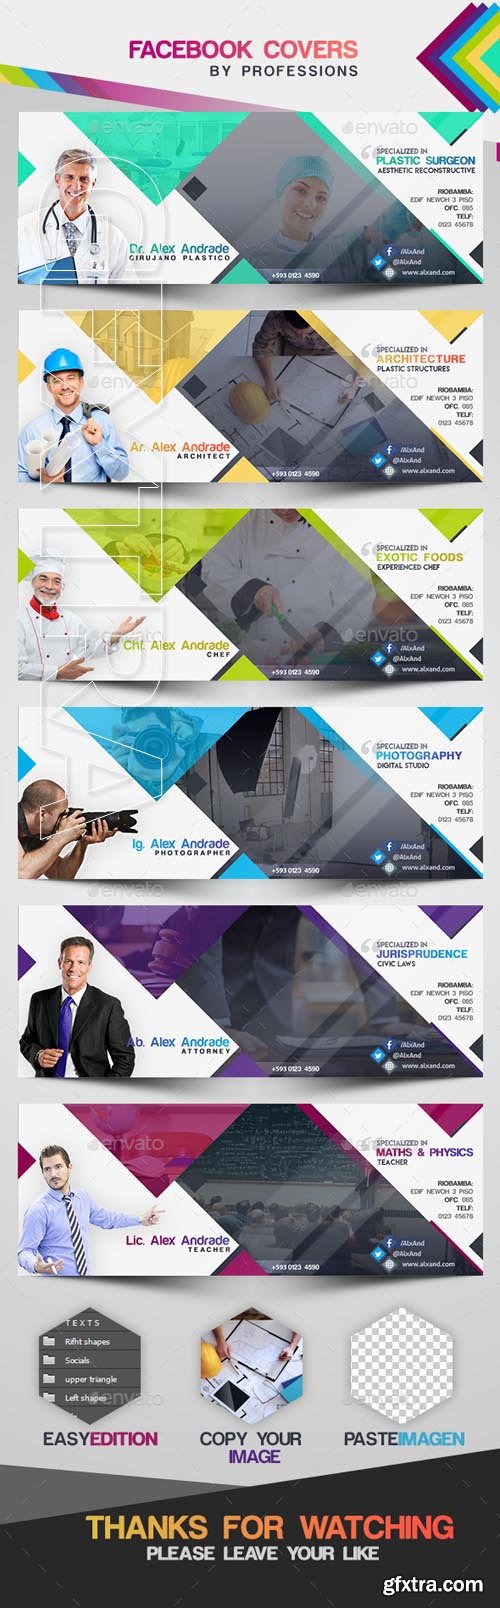 GraphicRiver - Facebook Cover by Professions 20619183